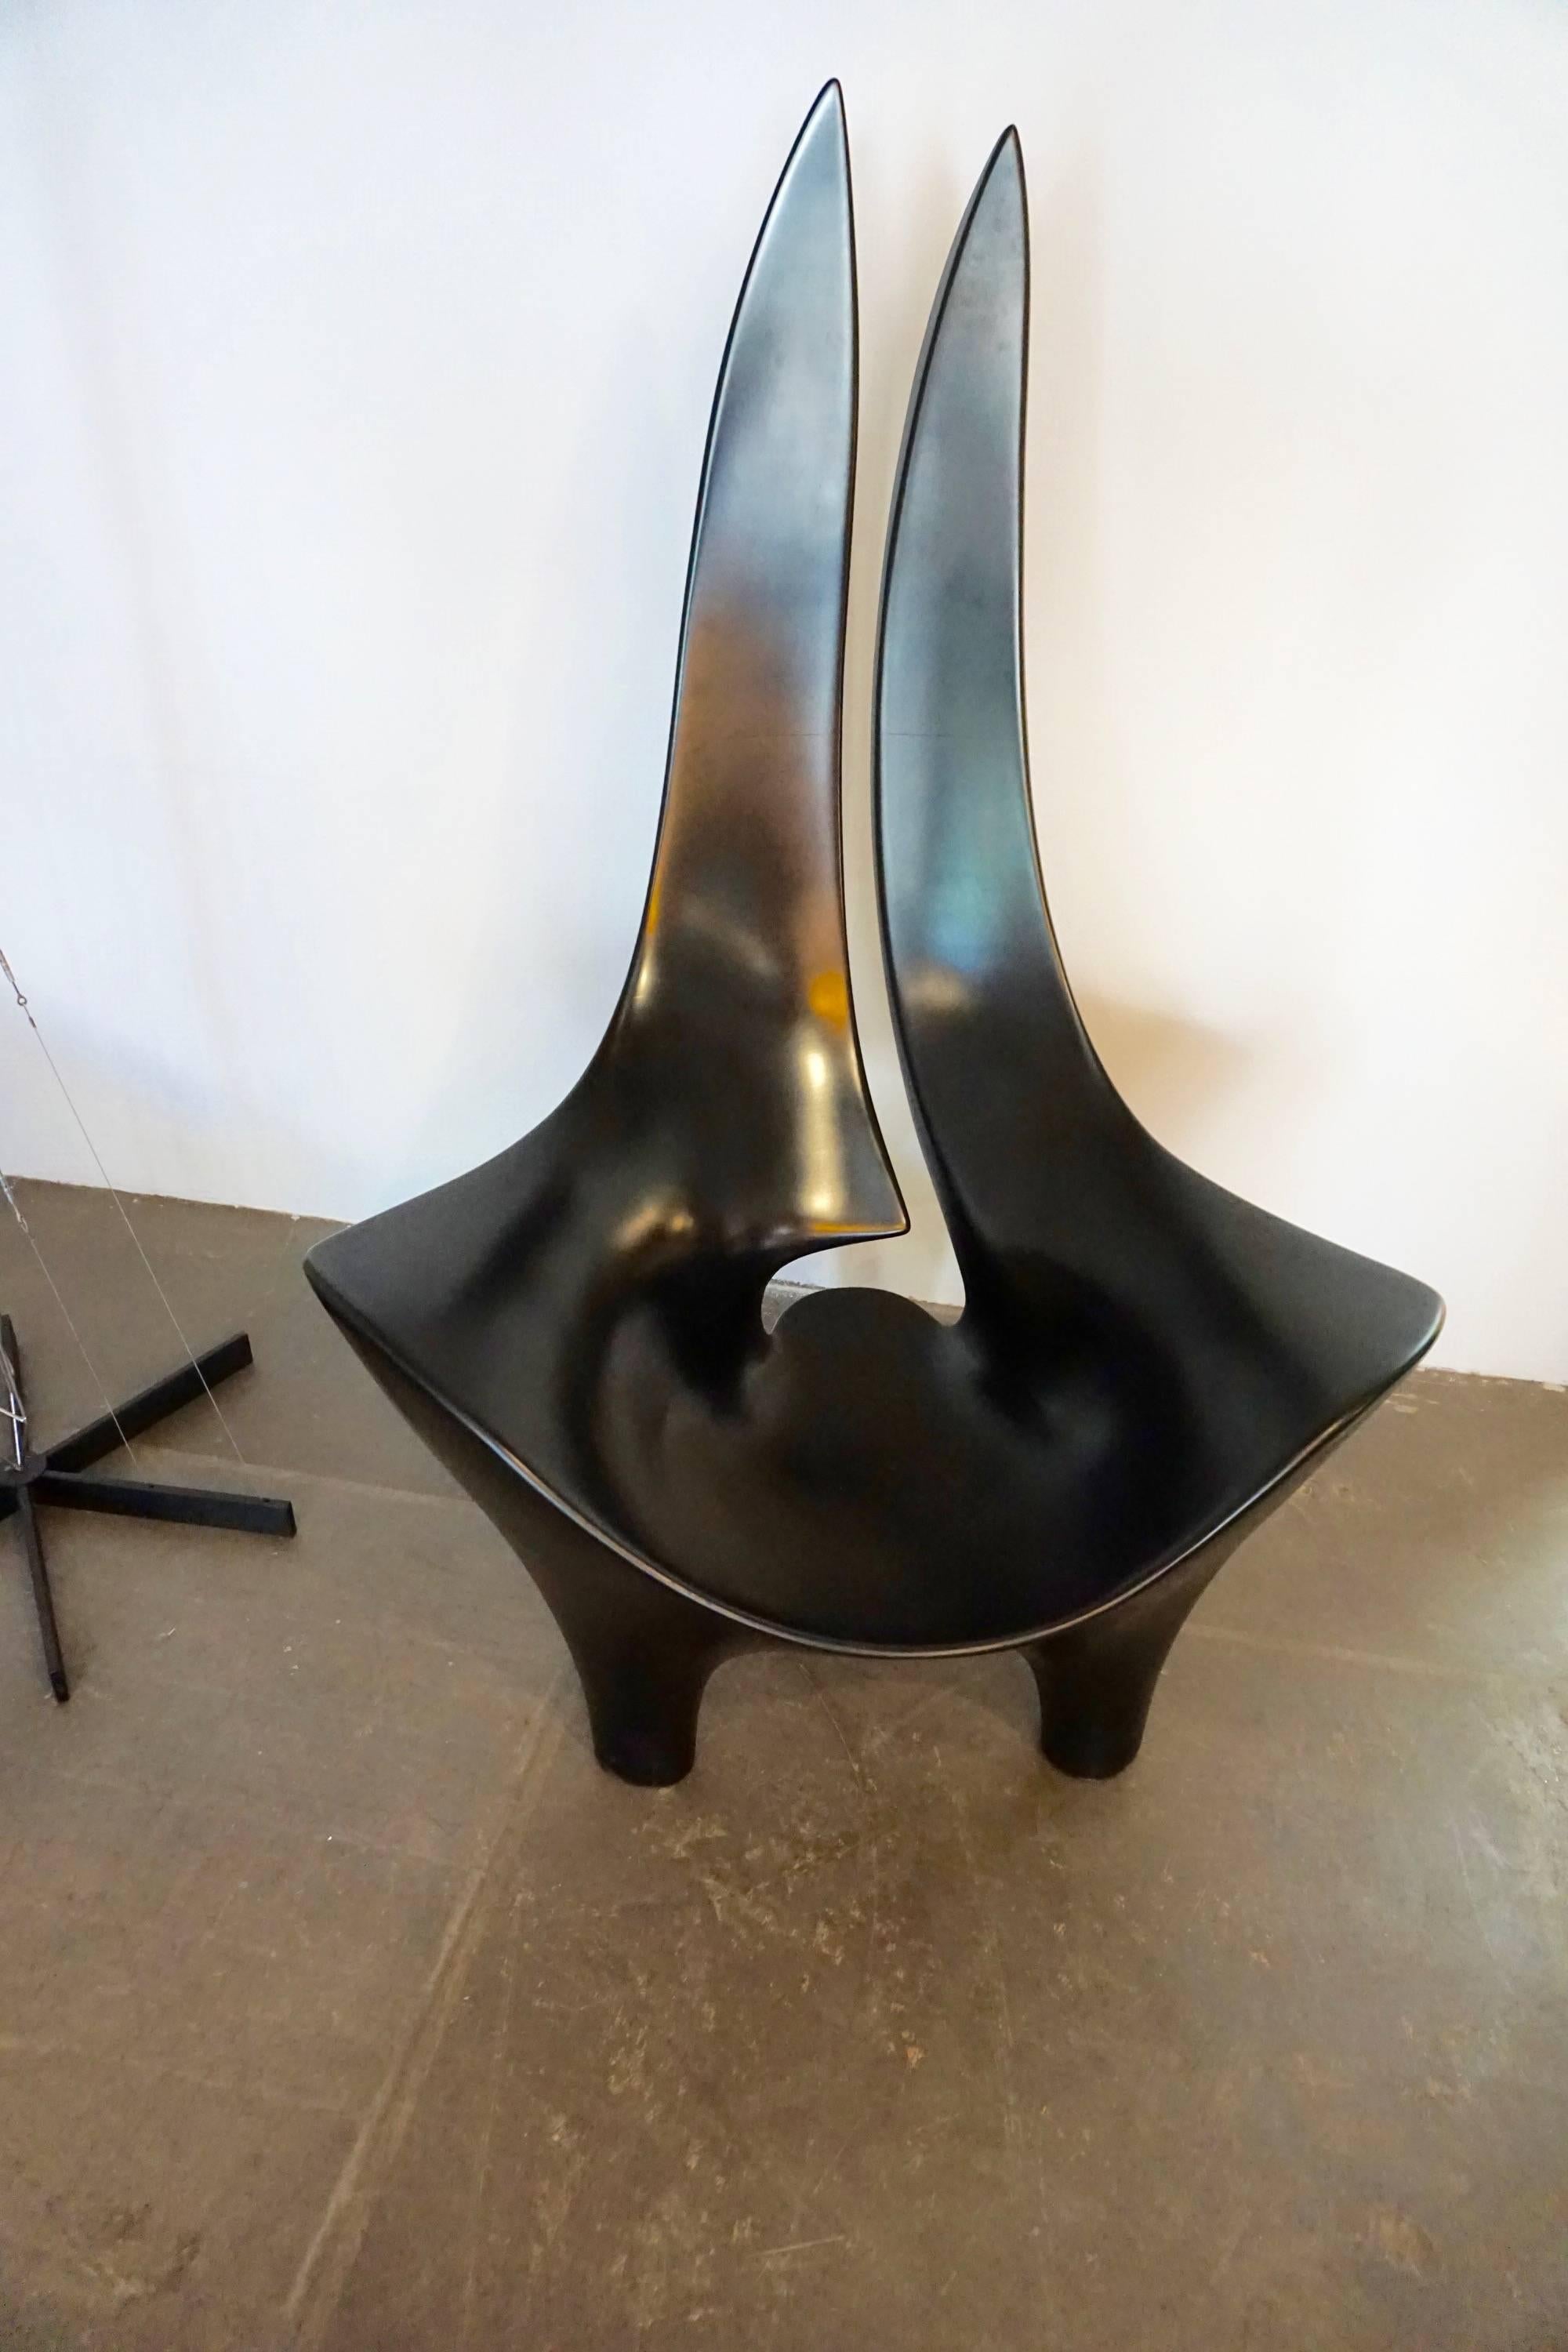 Sculpted Wood Chair by David Delthony 1